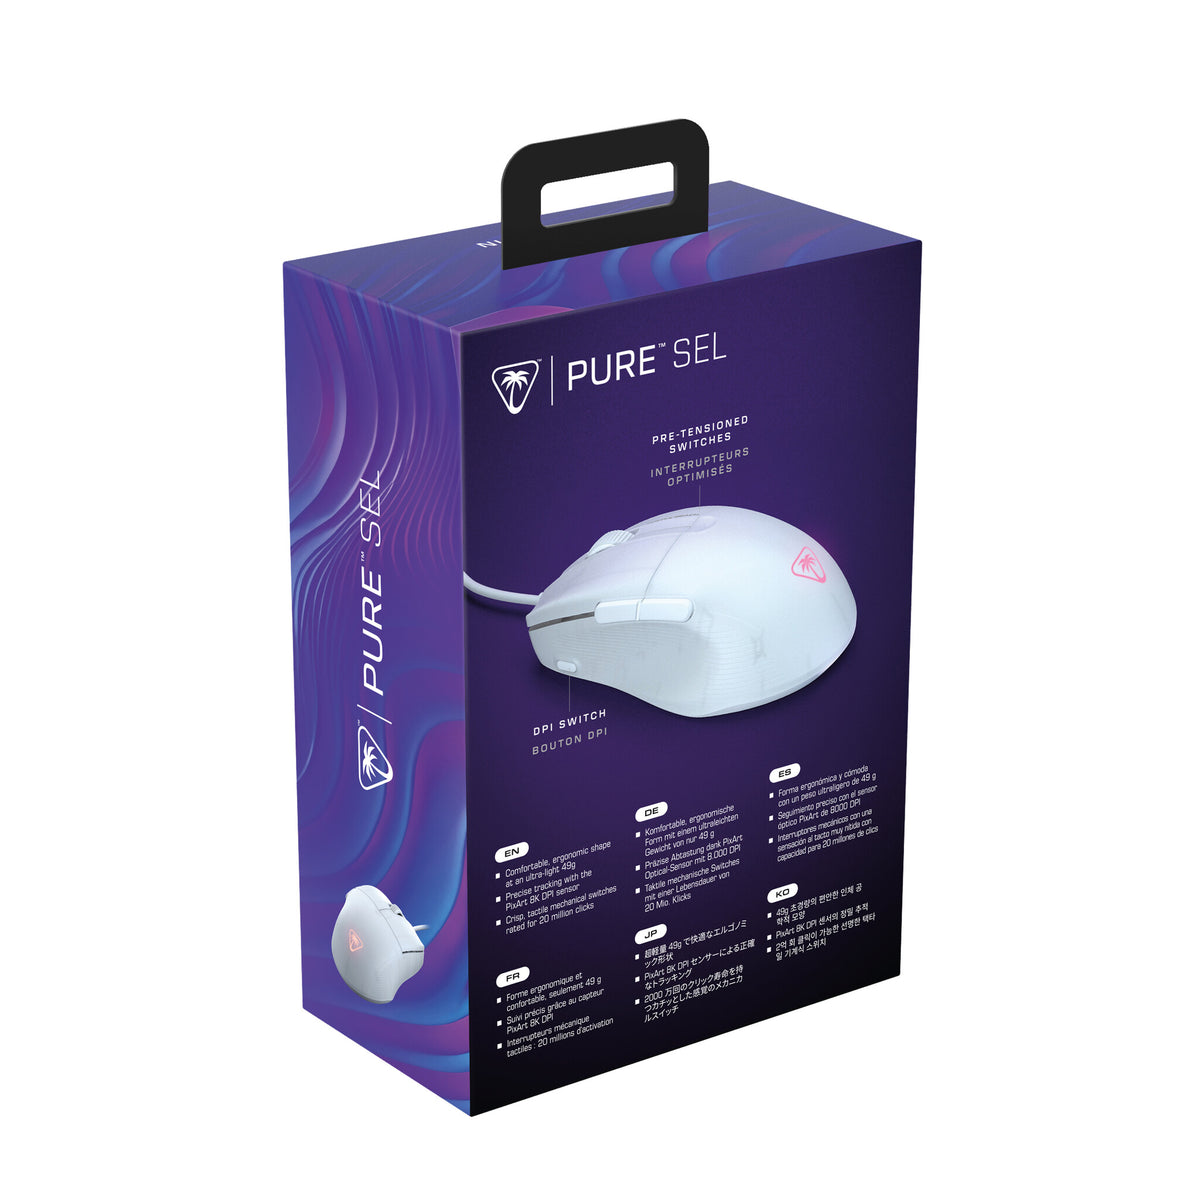 Turtle Beach Pure SEL - Ultra-Light RGB Gaming Mouse in White - 8,000 DPI